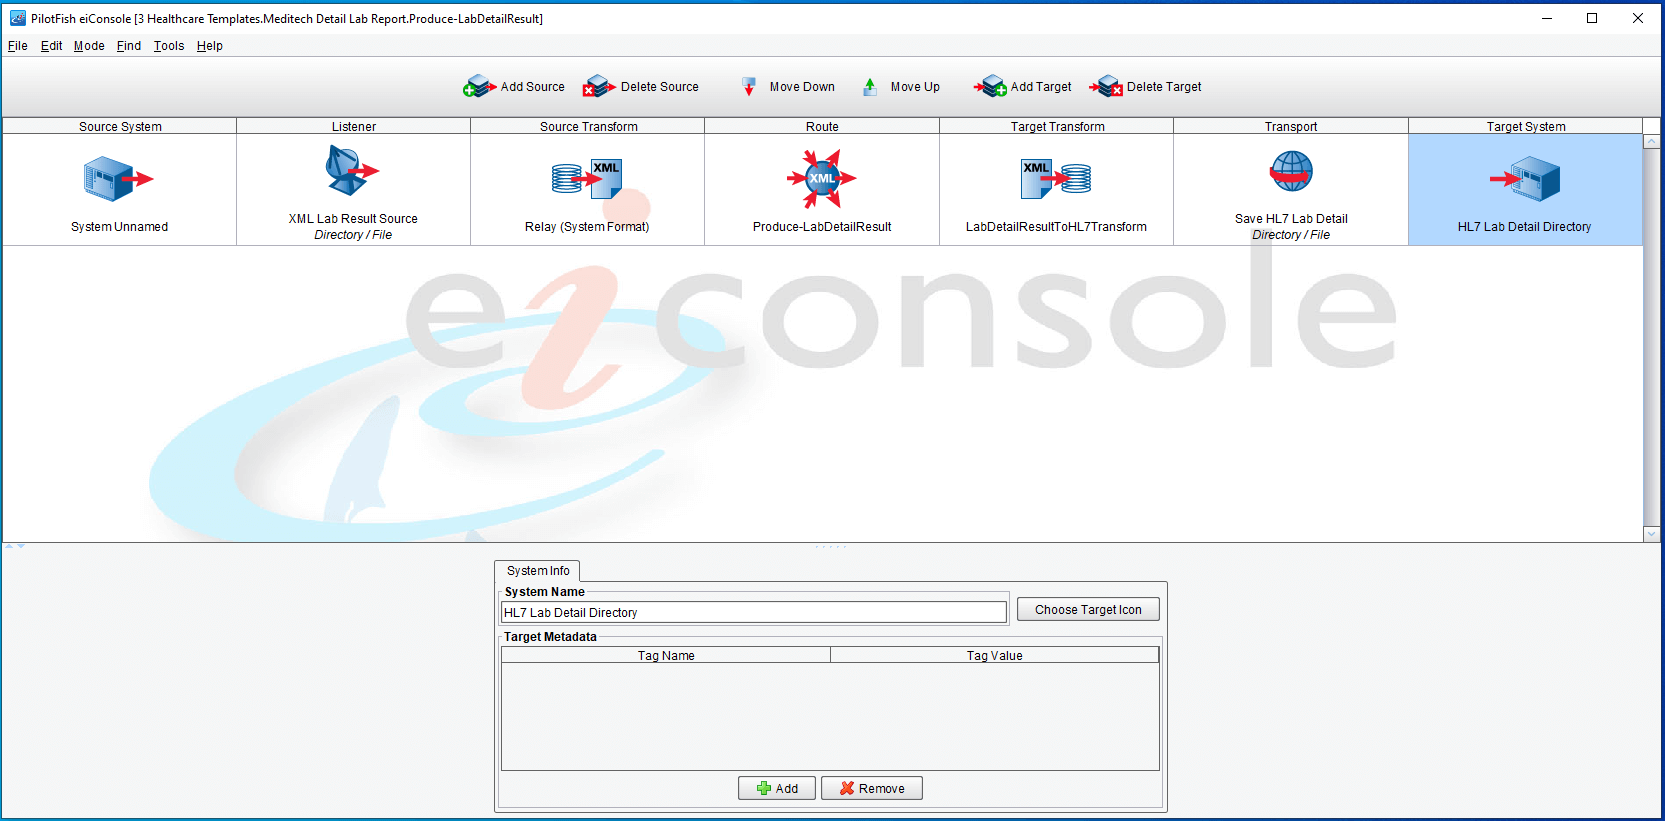 Configuration of Route Data Target in eiConsole IDE